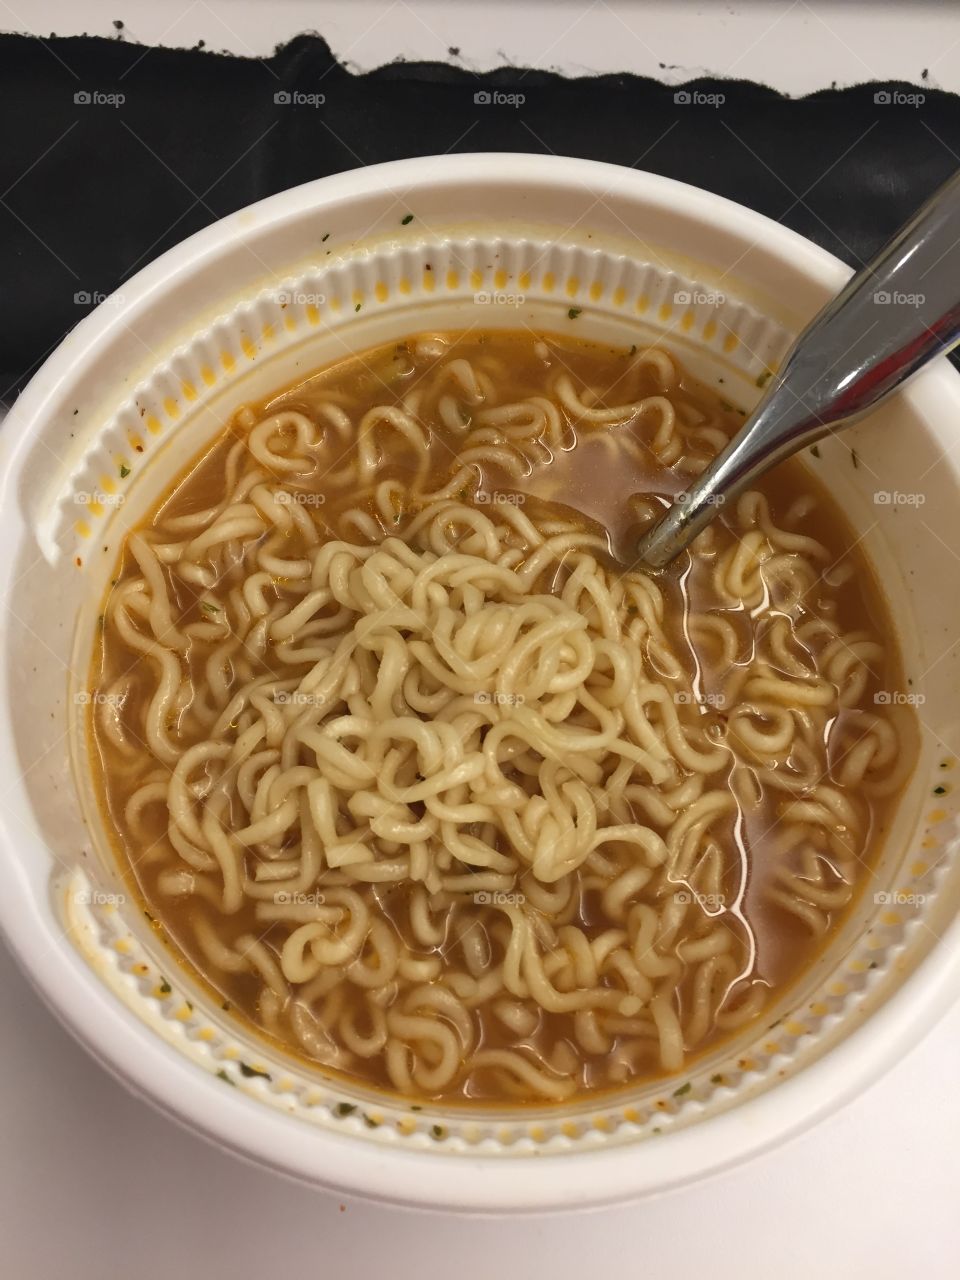 Noodles for lunch